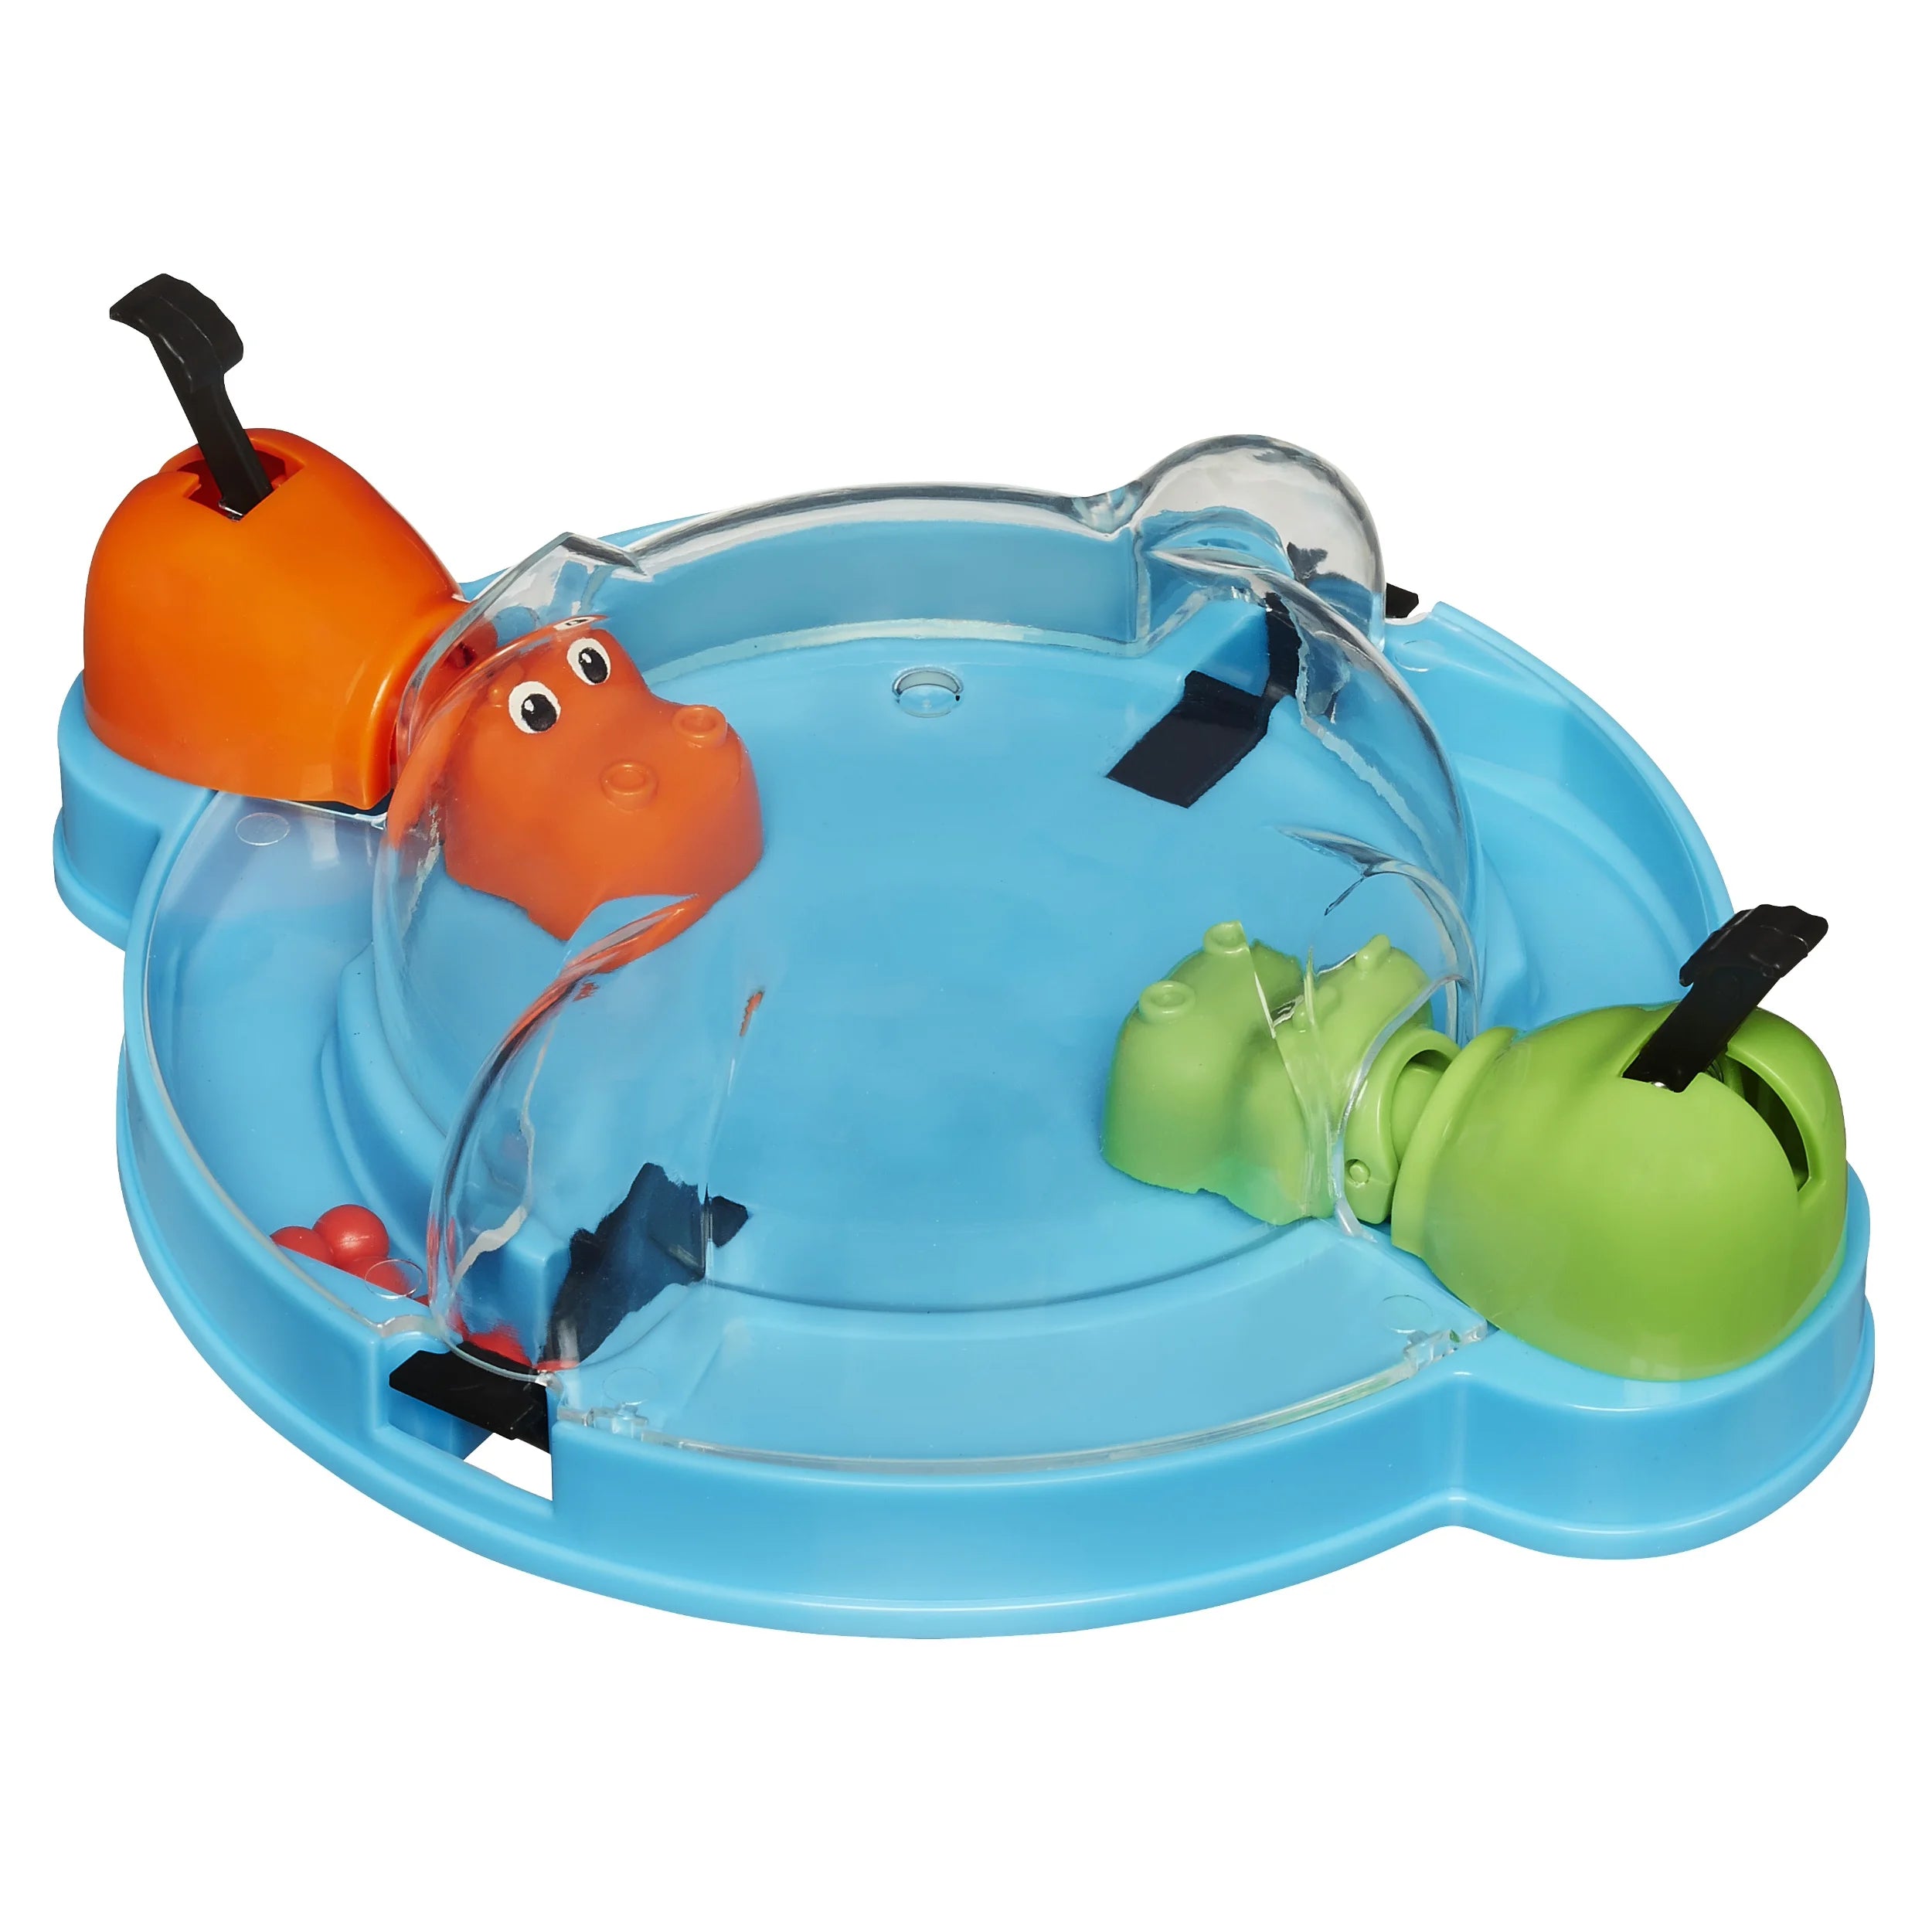 Hasbro - Hungry Hungry Hippos Grab and Go Grab & Go Board game Fine motor skill (dexterity)